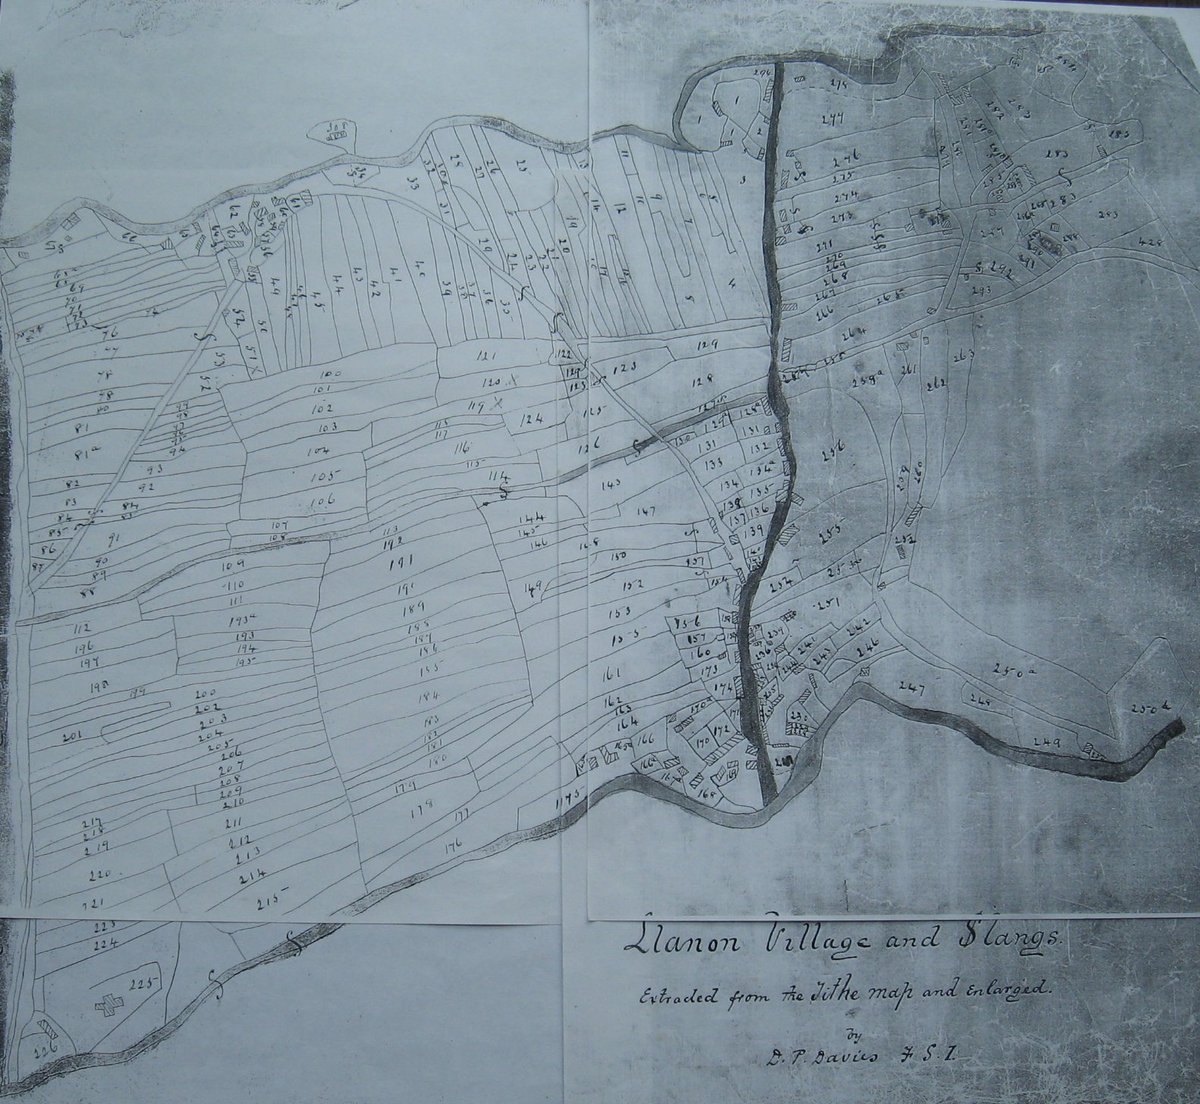 The 1840s parish tithe map reveals hundreds of interlocking "slangs" – narrow strips of farmland of a size that could be managed by a single household.Looked at from the ground, you'd struggle to notice the delineation. But from the sky, the evidence is palpable.